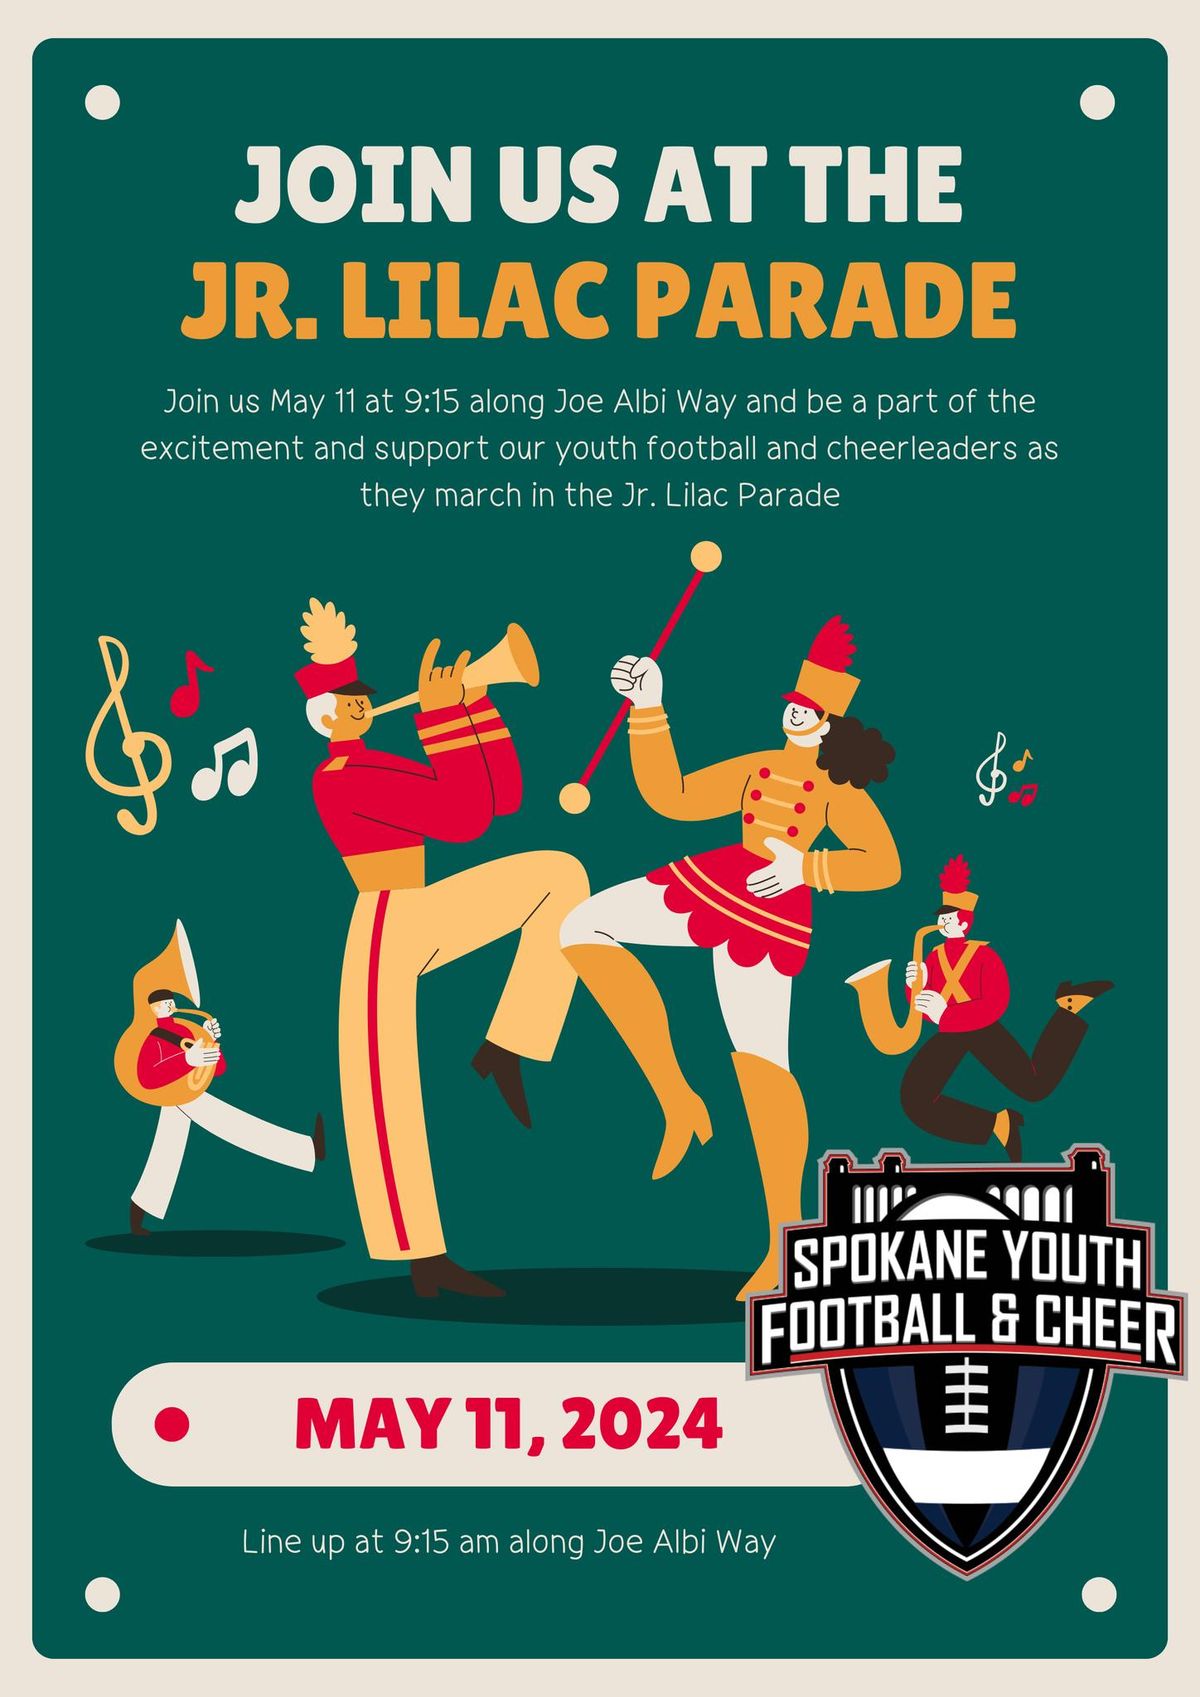 March with us in the Jr. Lilac Parade